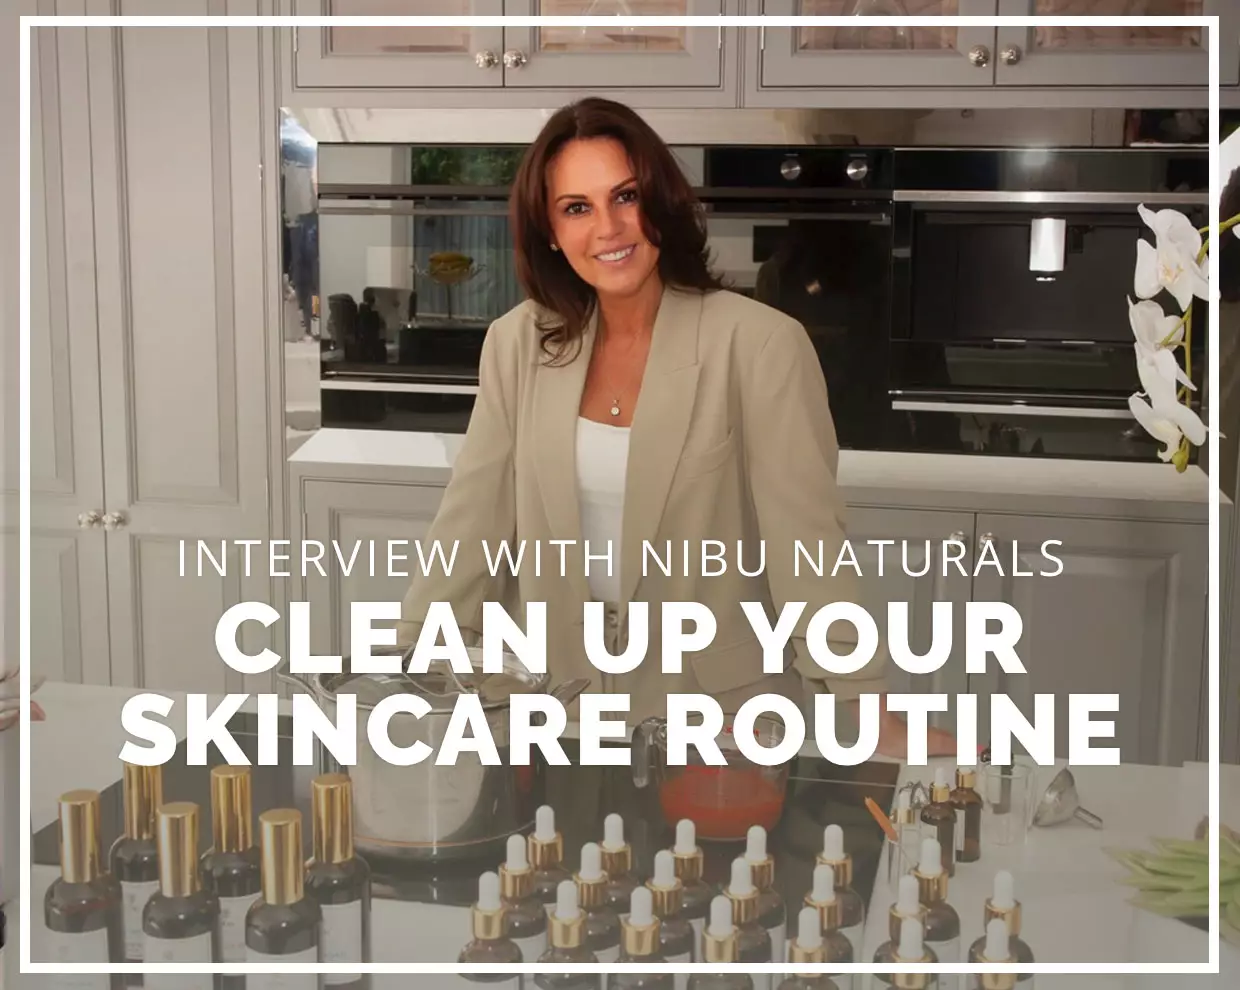 Interview with Nibu Naturals - Clean Up Your Skincare Routine